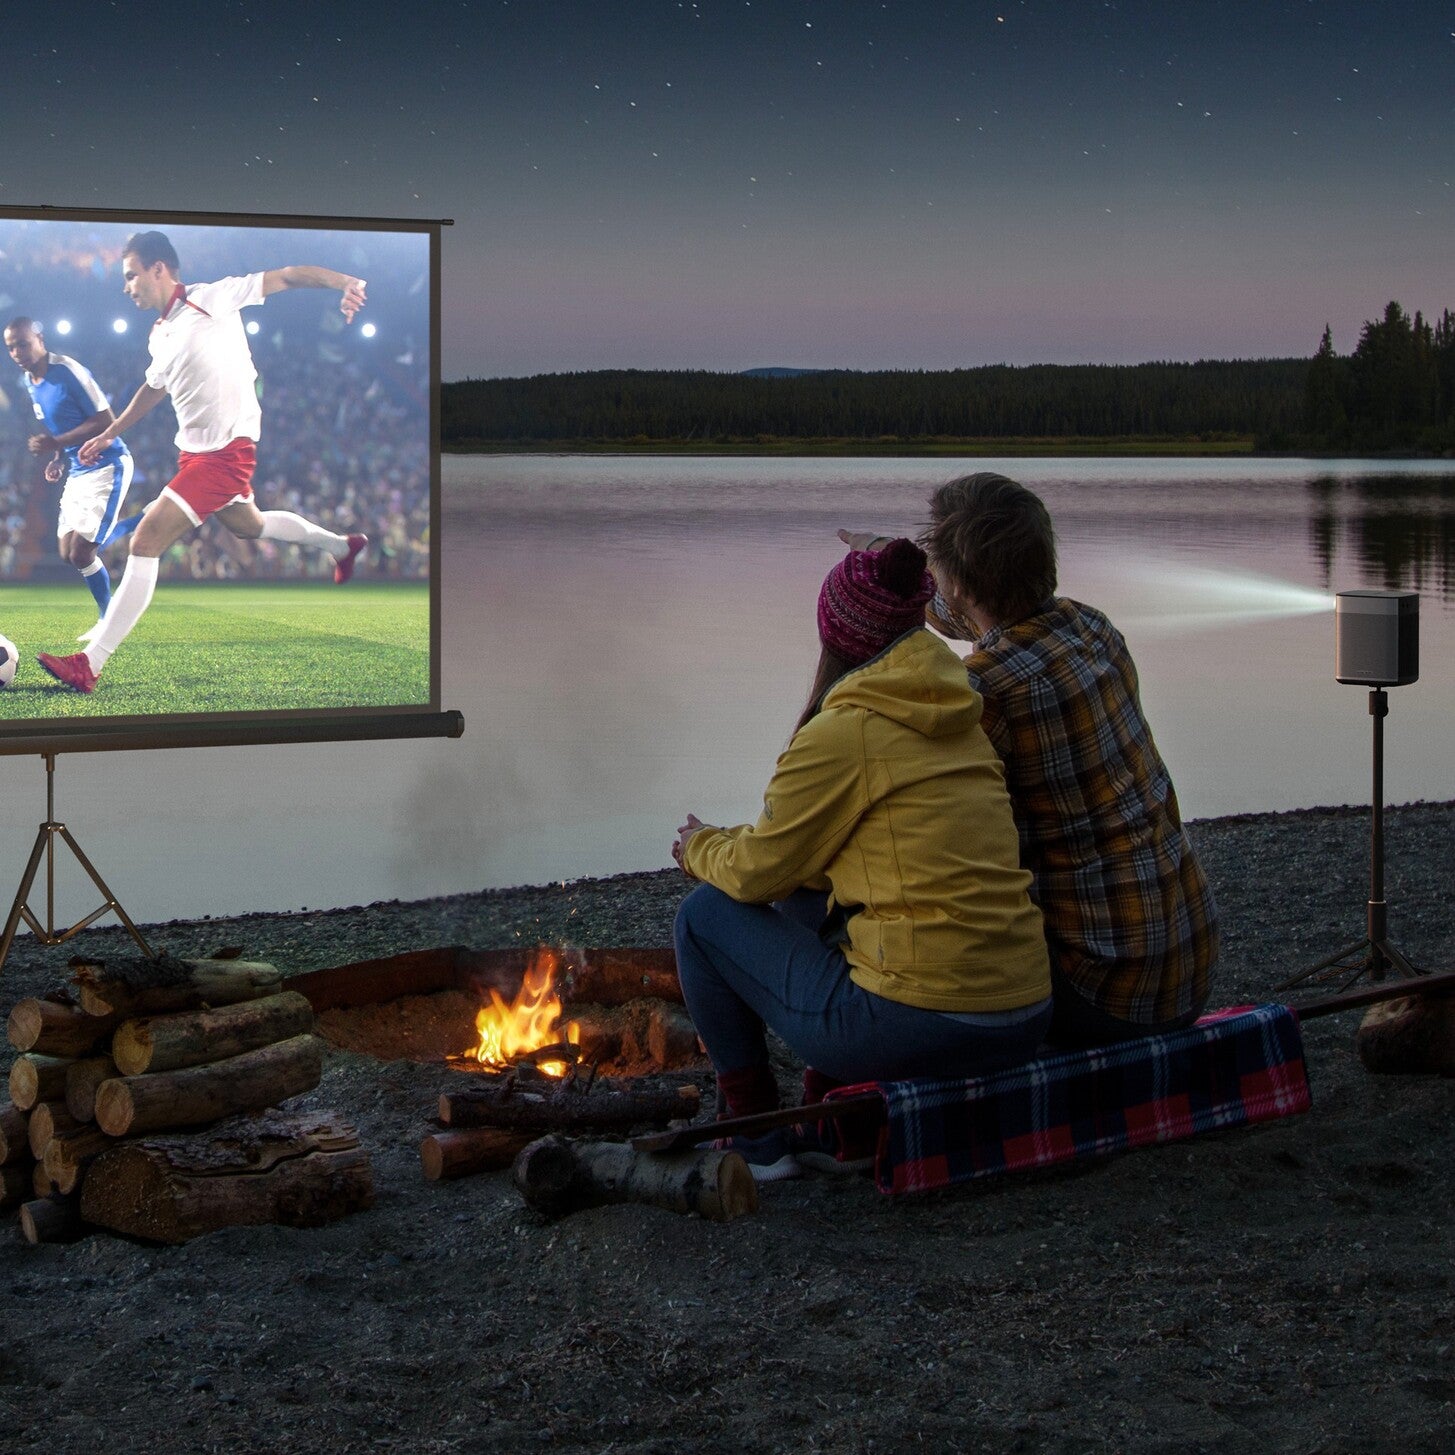 How to Set Up a Projector When Camping